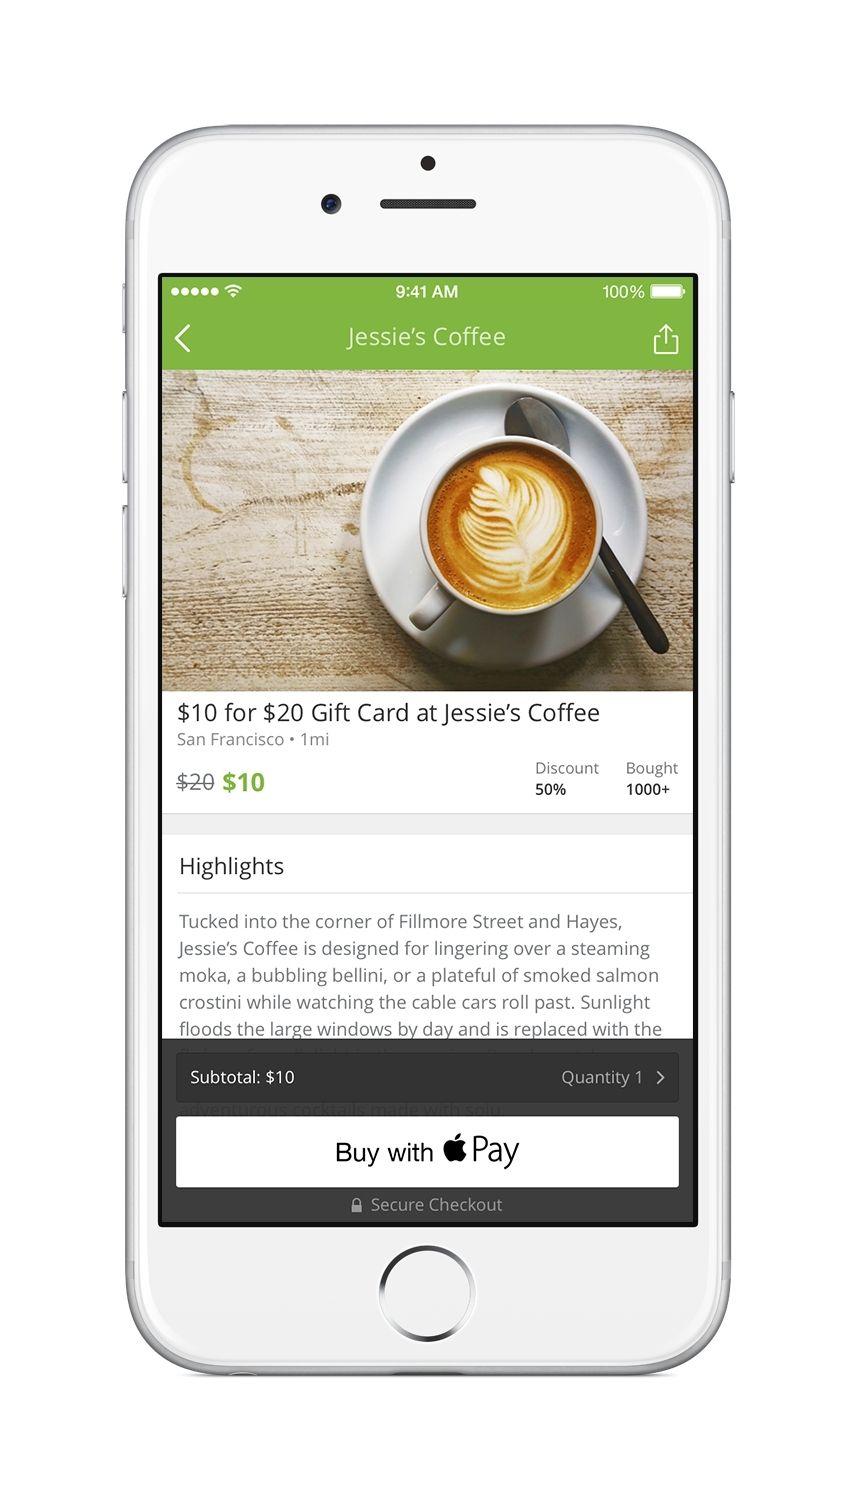 Groupon App Logo - Groupon Updates Popular iPhone App to Include Apple Pay